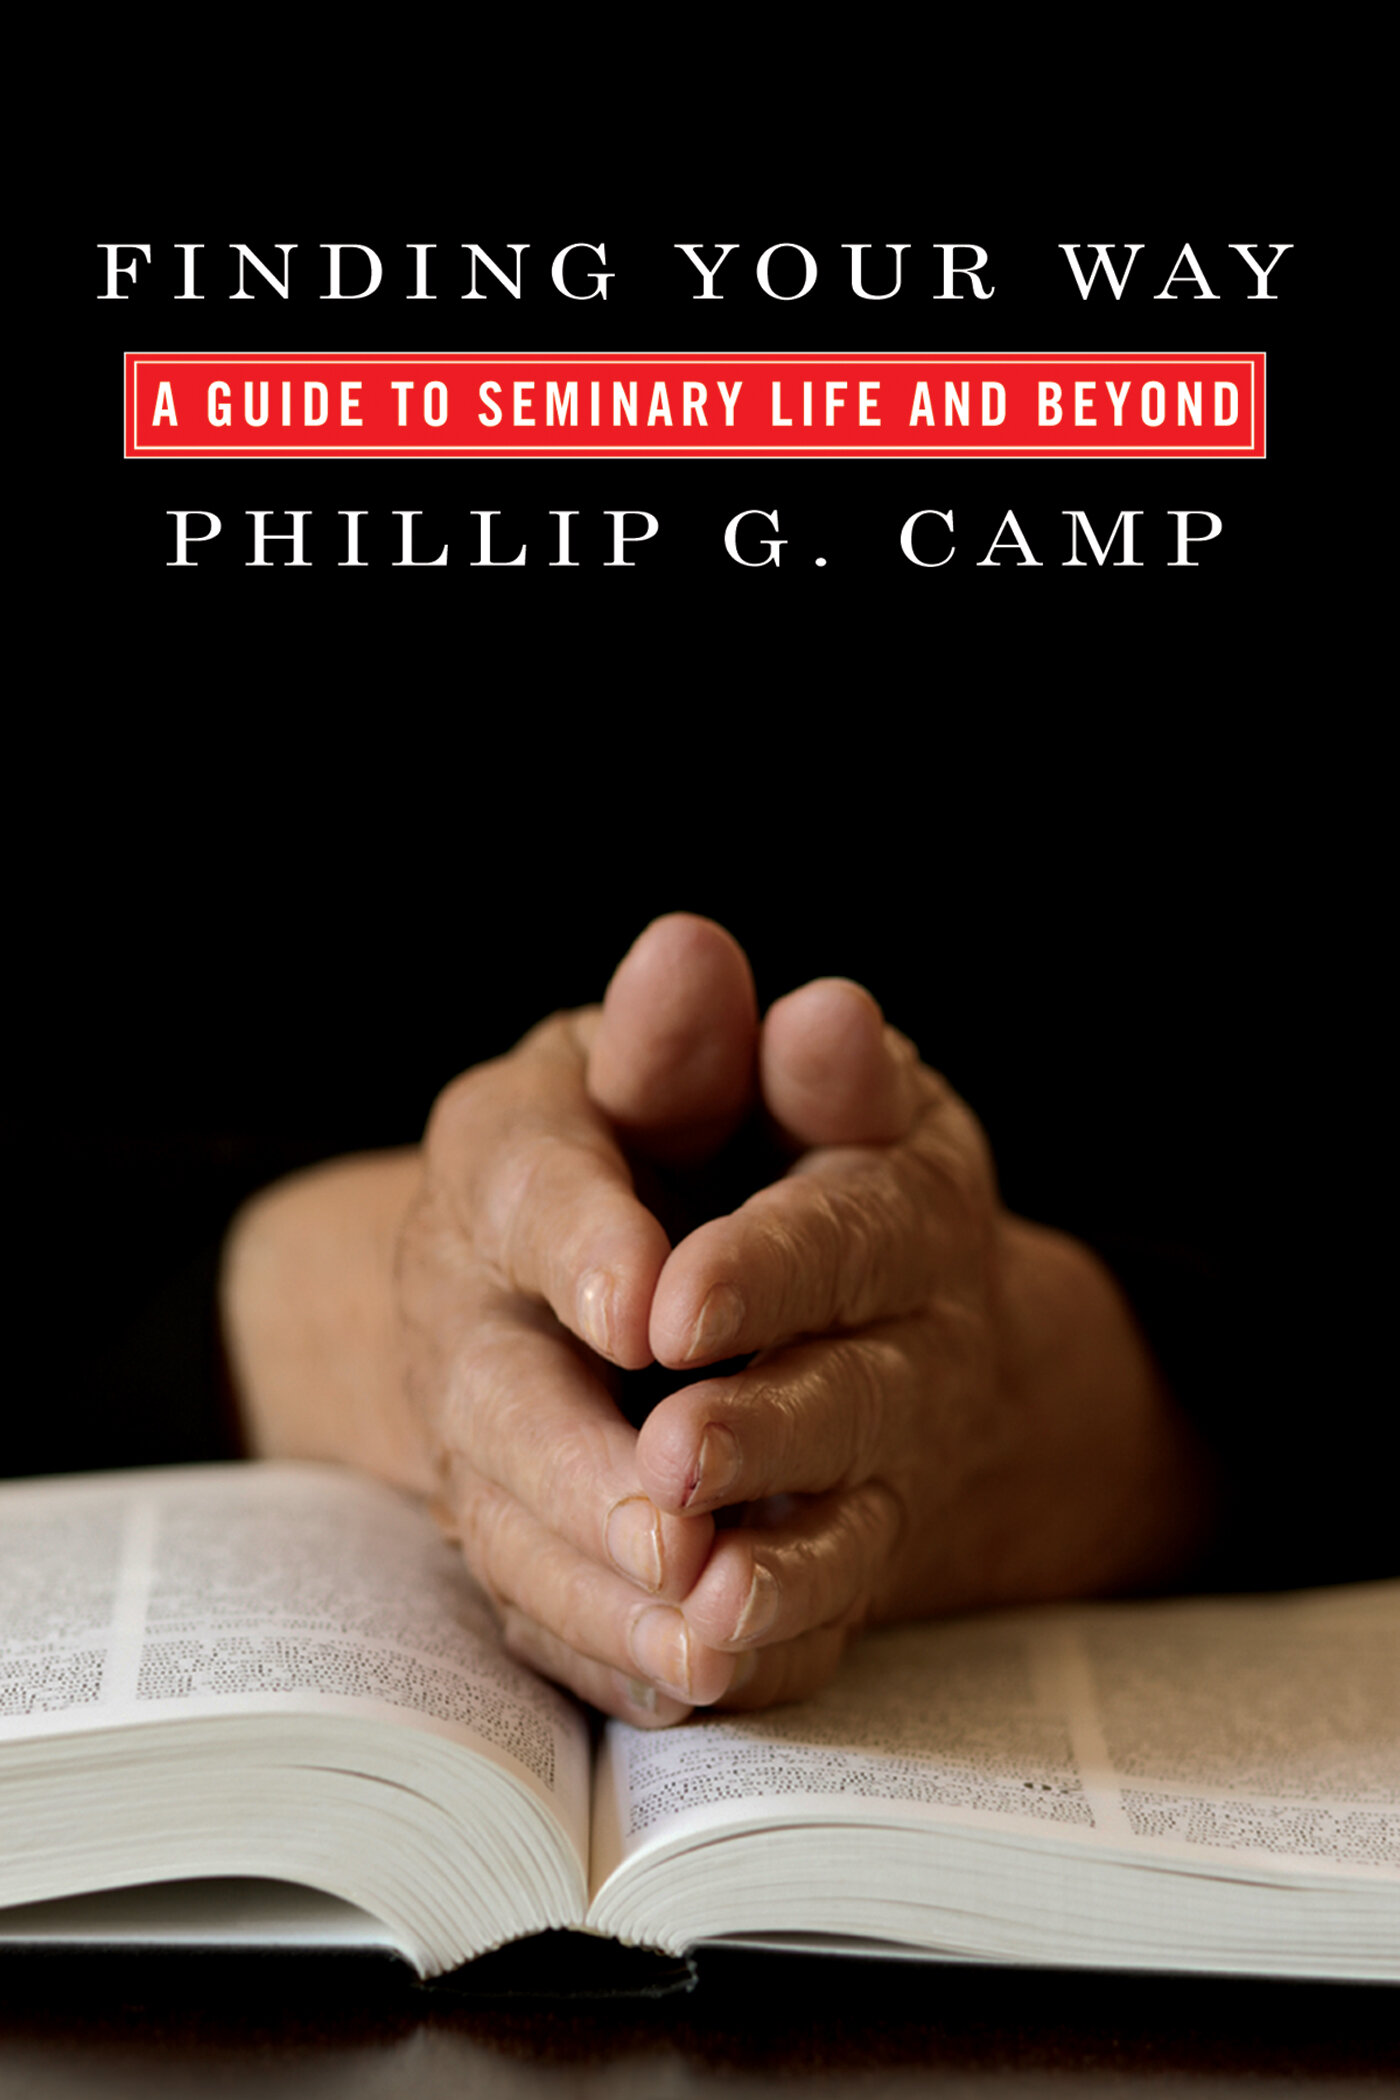 Finding Your Way: A Guide to Seminary Life and Beyond